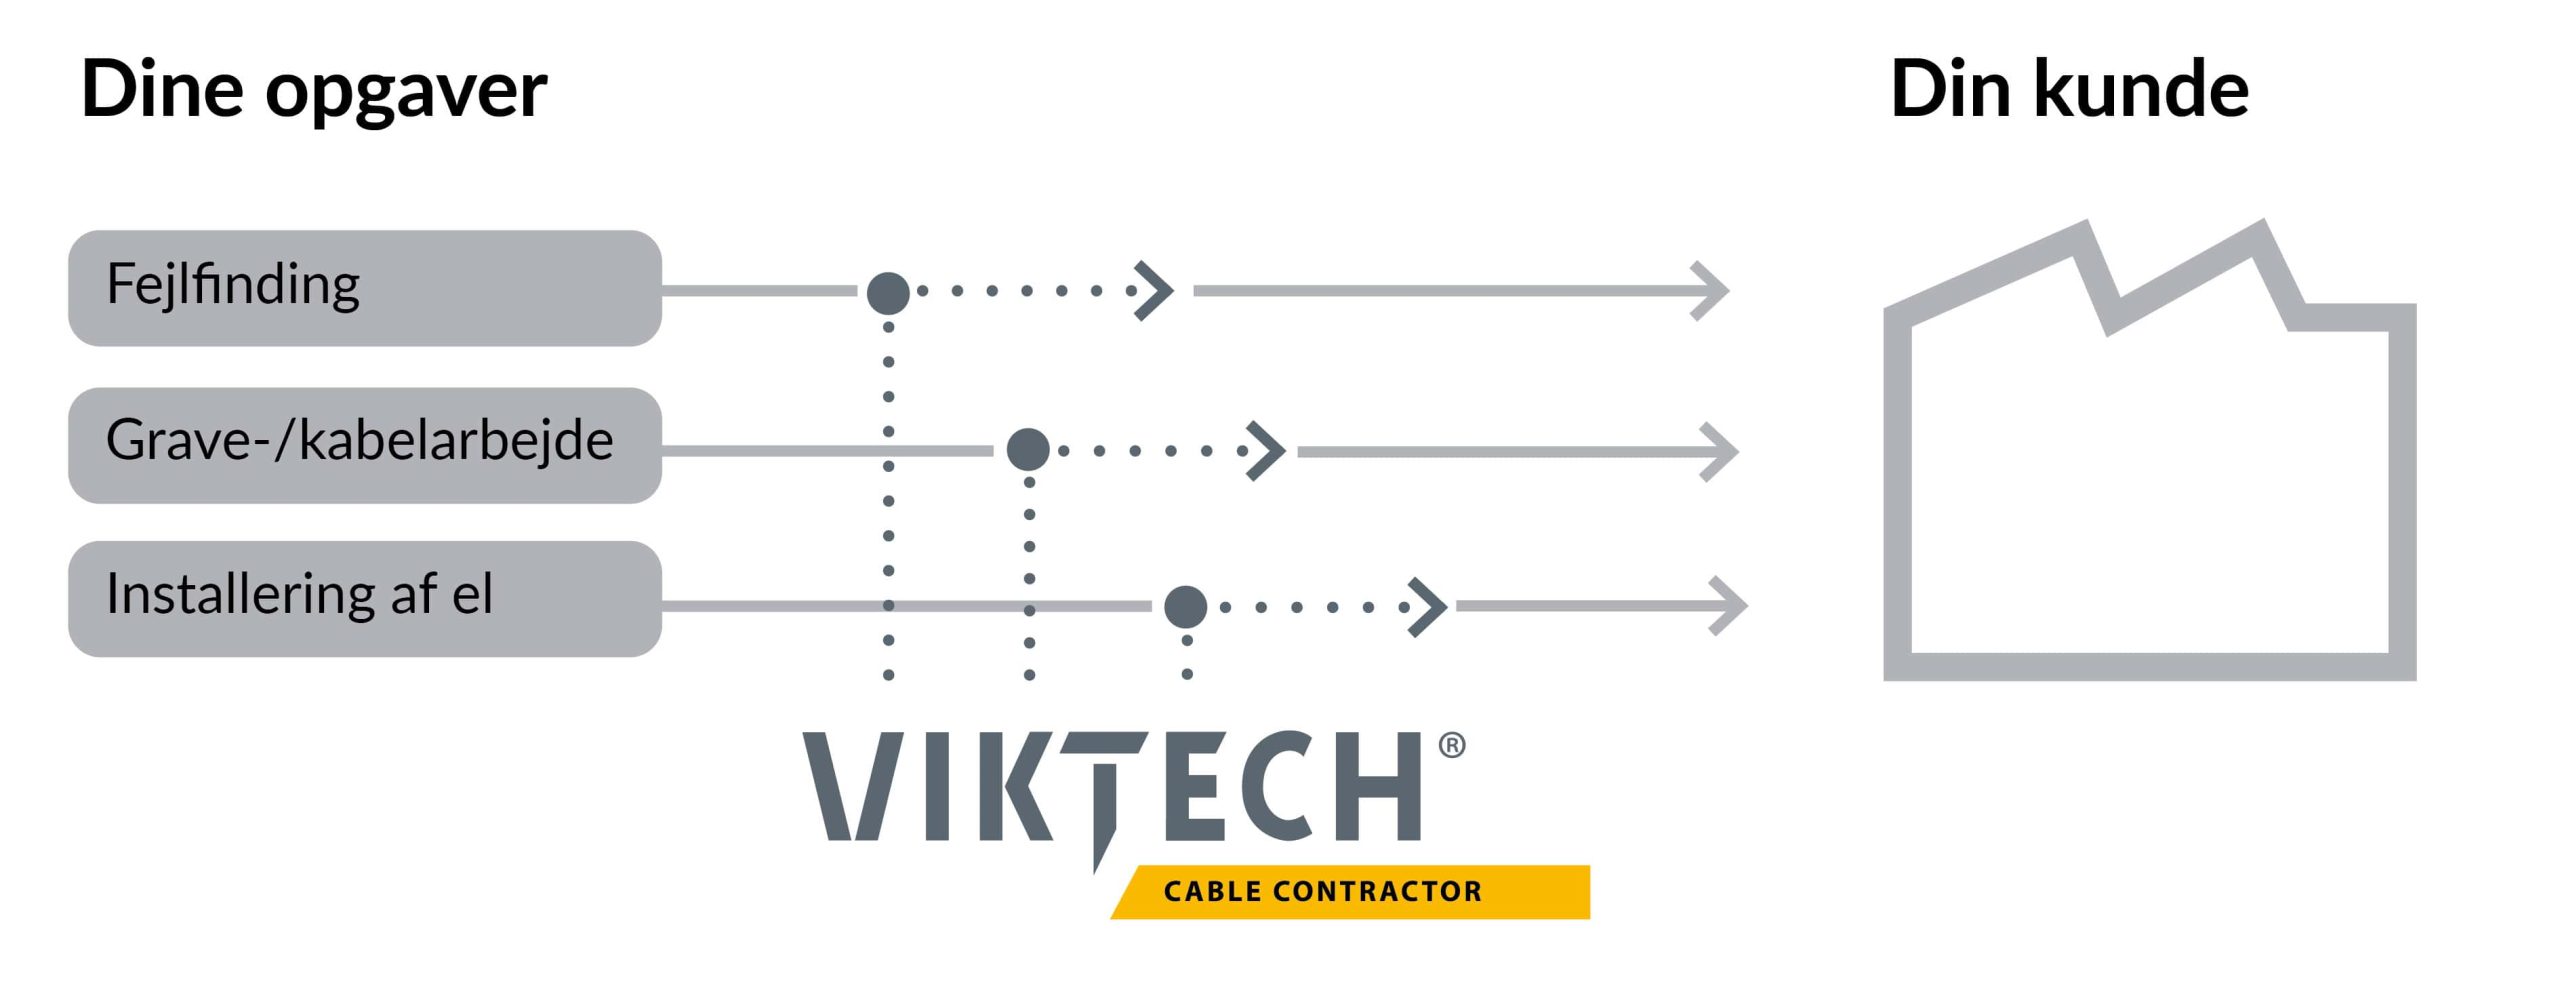 viktech cable contractor fle scaled